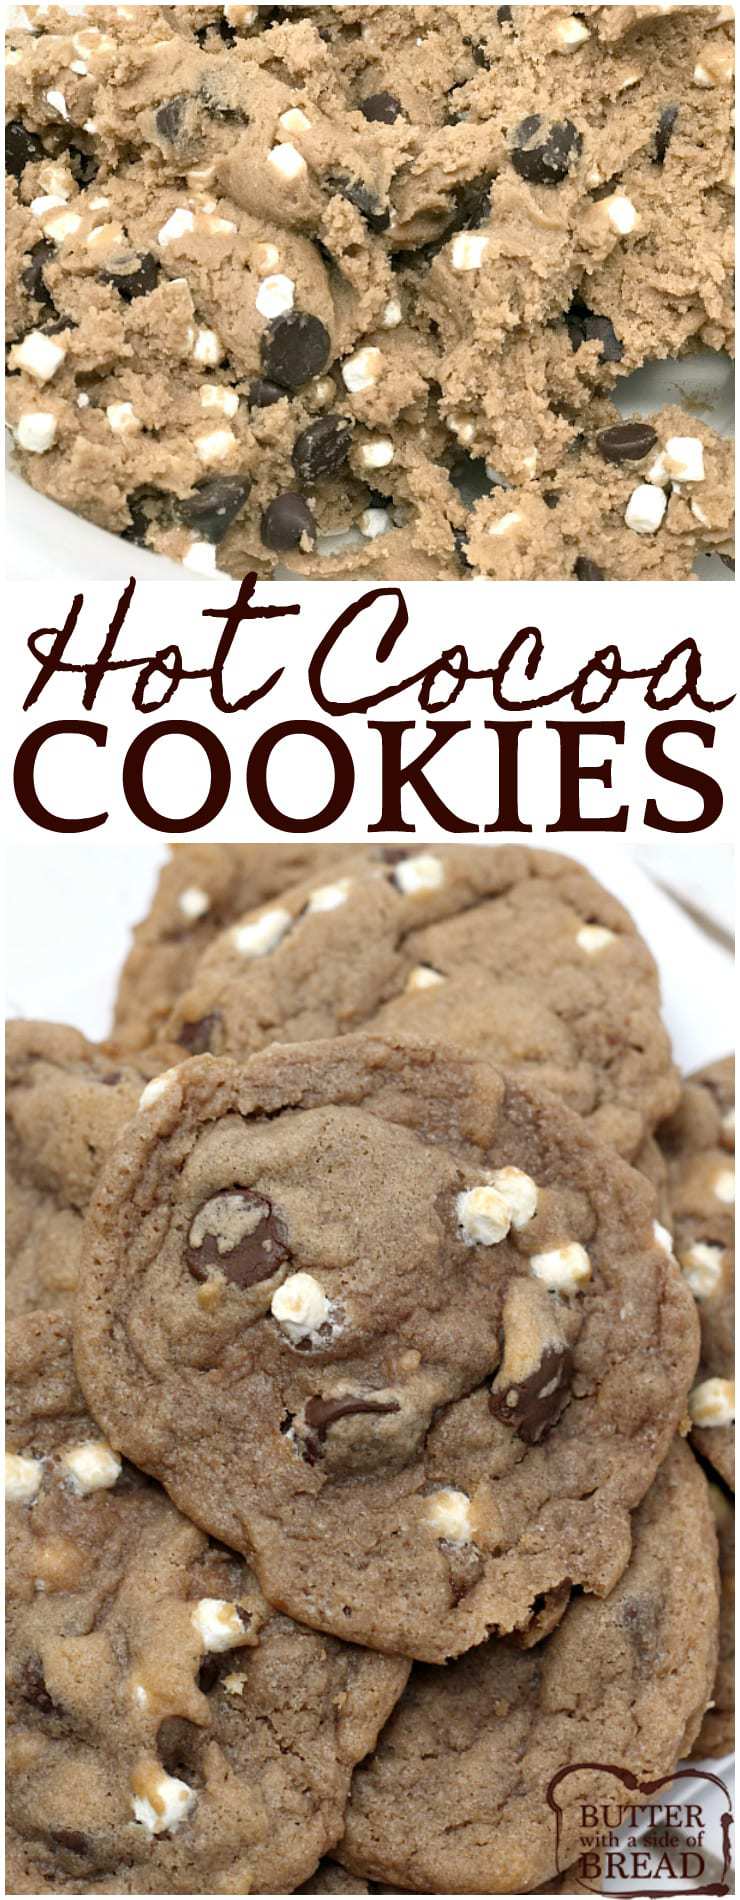 Hot Cocoa Cookies are the perfect winter treat combination with hot cocoa, #chocolate, and #marshmallow bits all baked into one delicious #cookie! Insanely delicious cookie #recipe from Butter With A Side of Bread